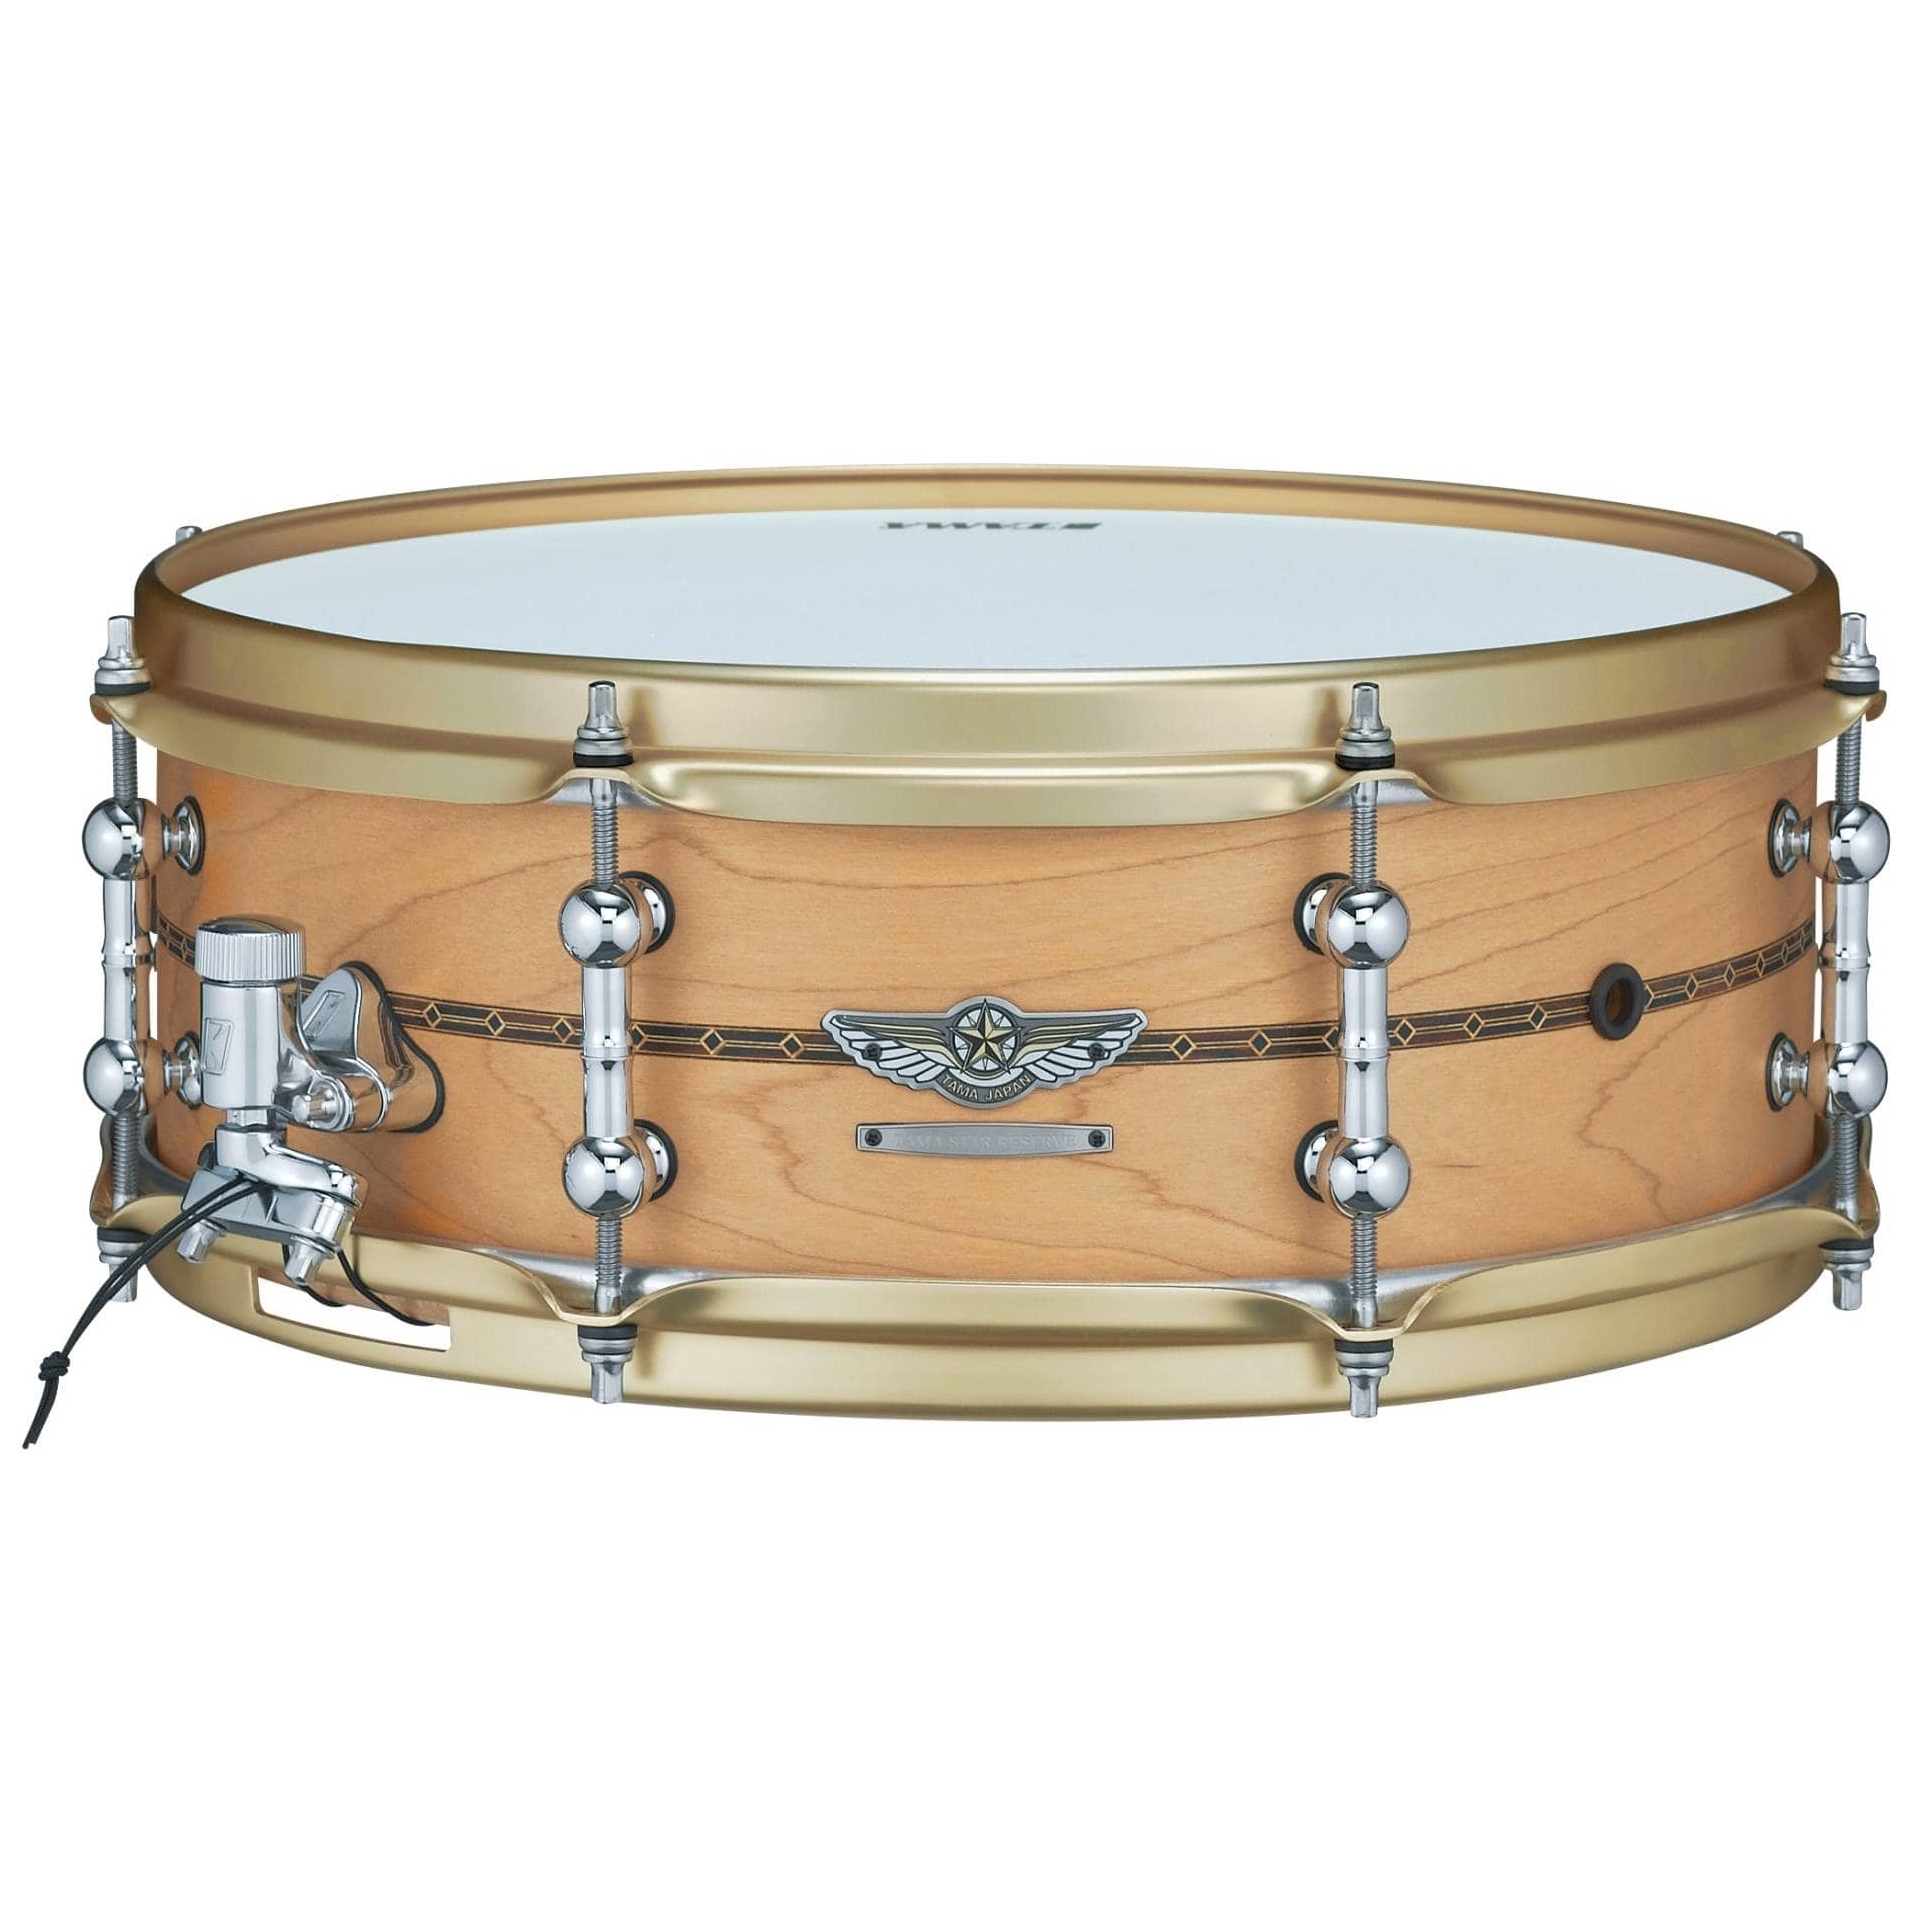 Tama TLM145S-OMP 14" x 5" SD - STAR Reserve Maple